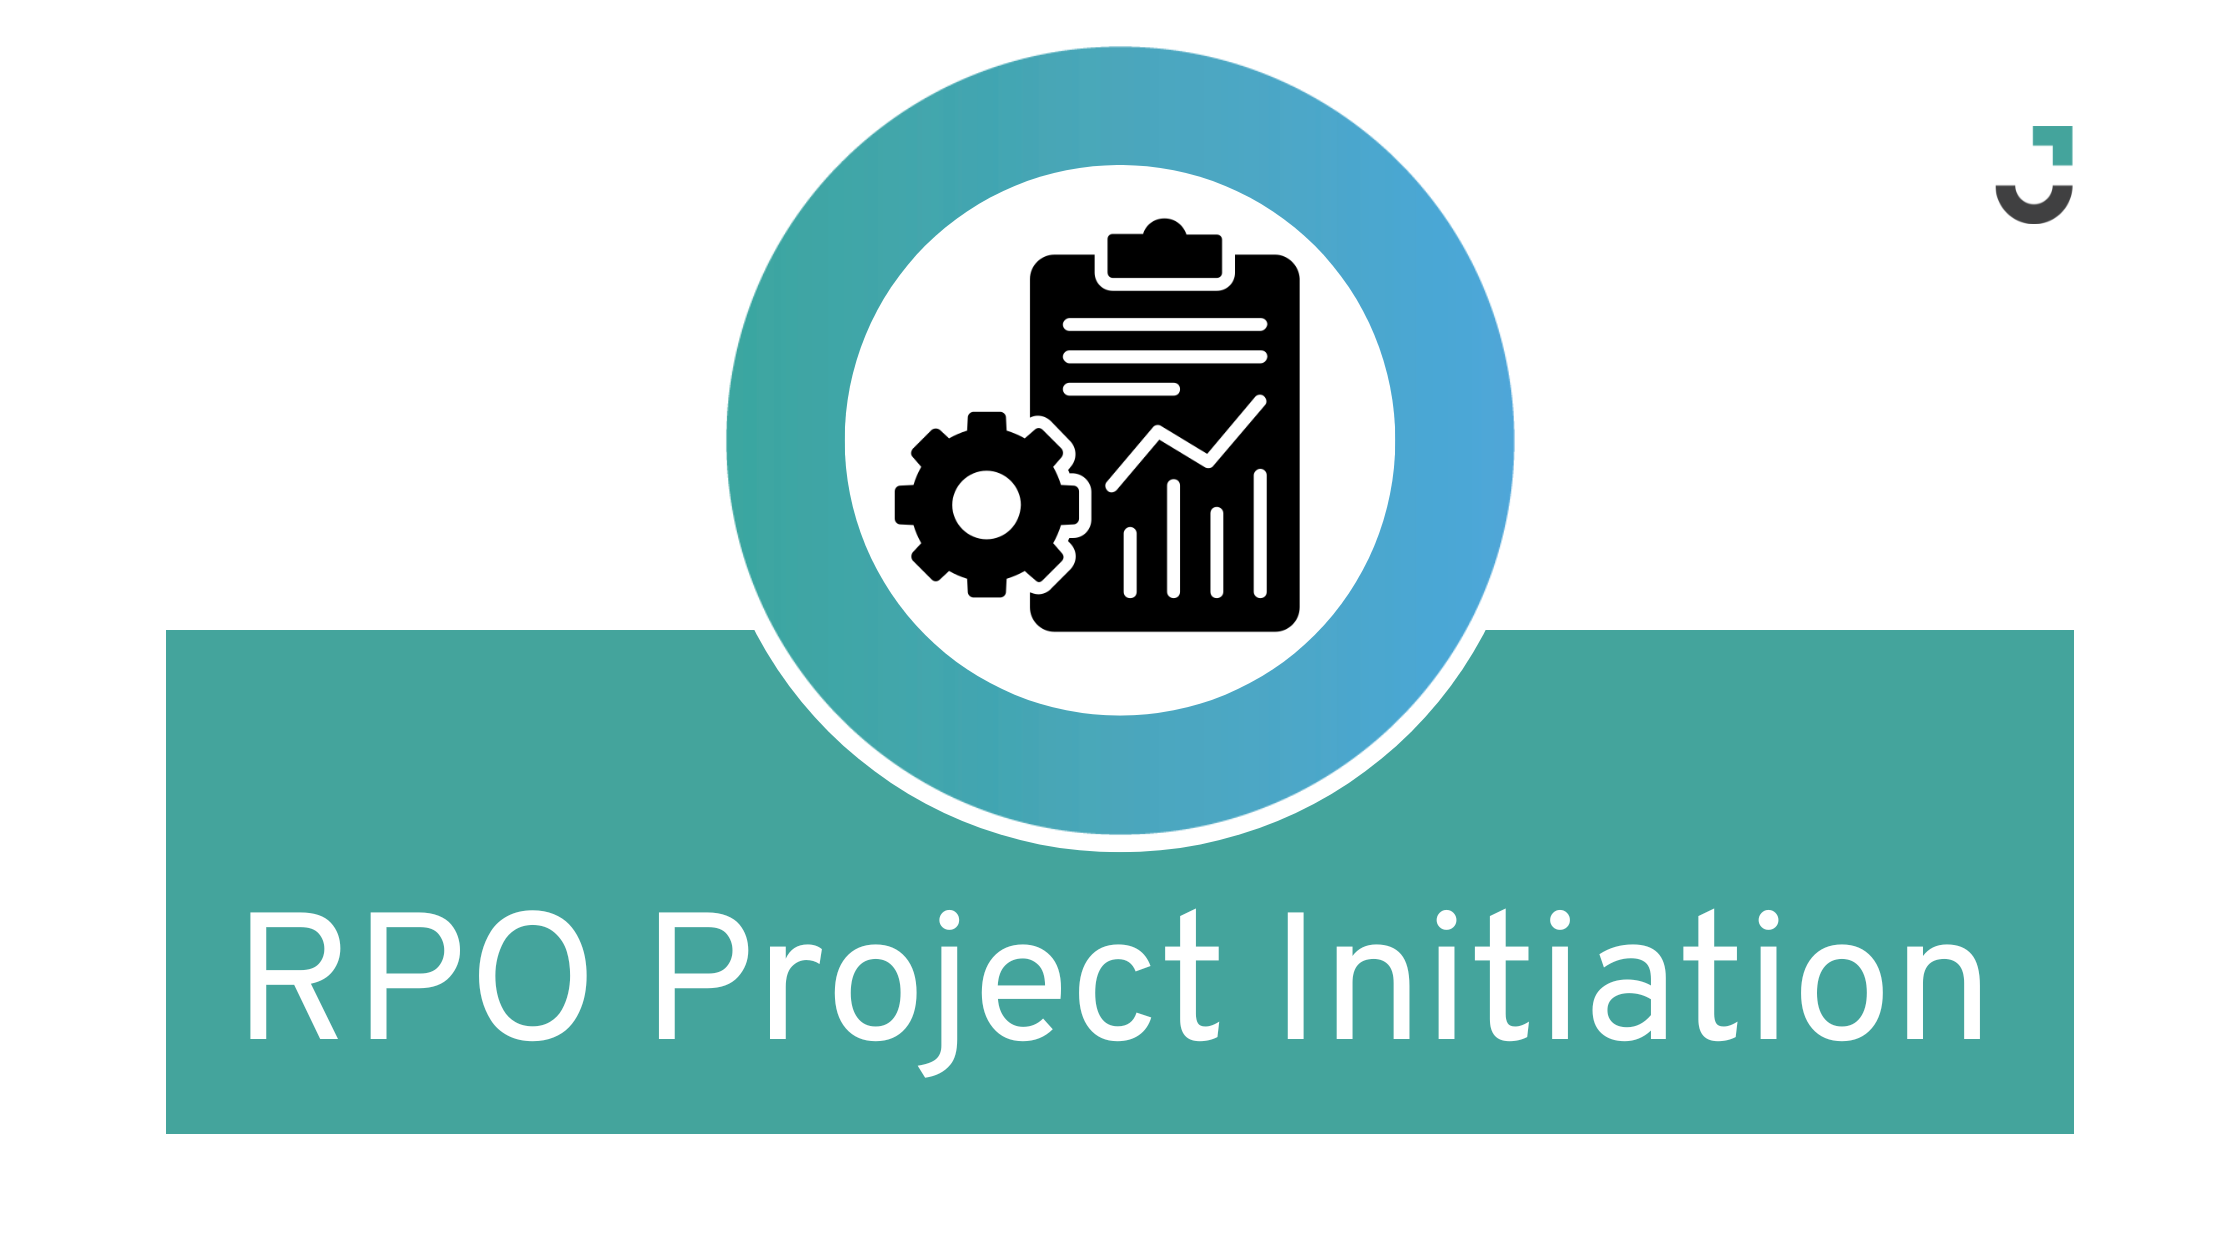 RPO Project Initiation